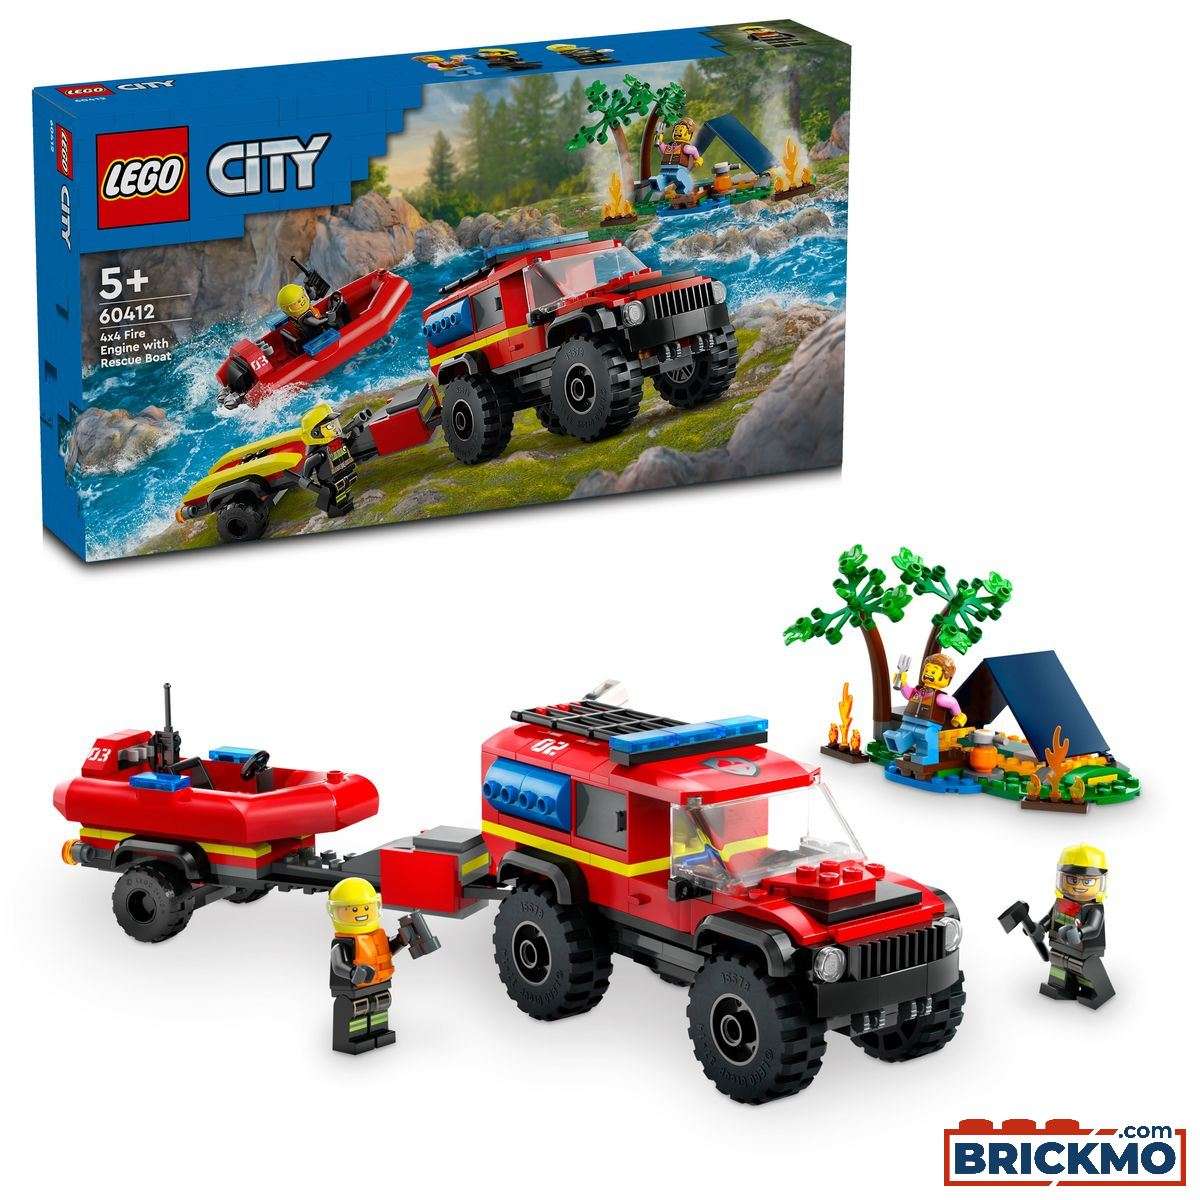 LEGO City 60412 4x4 Fire Truck with Rescue Boat 60412